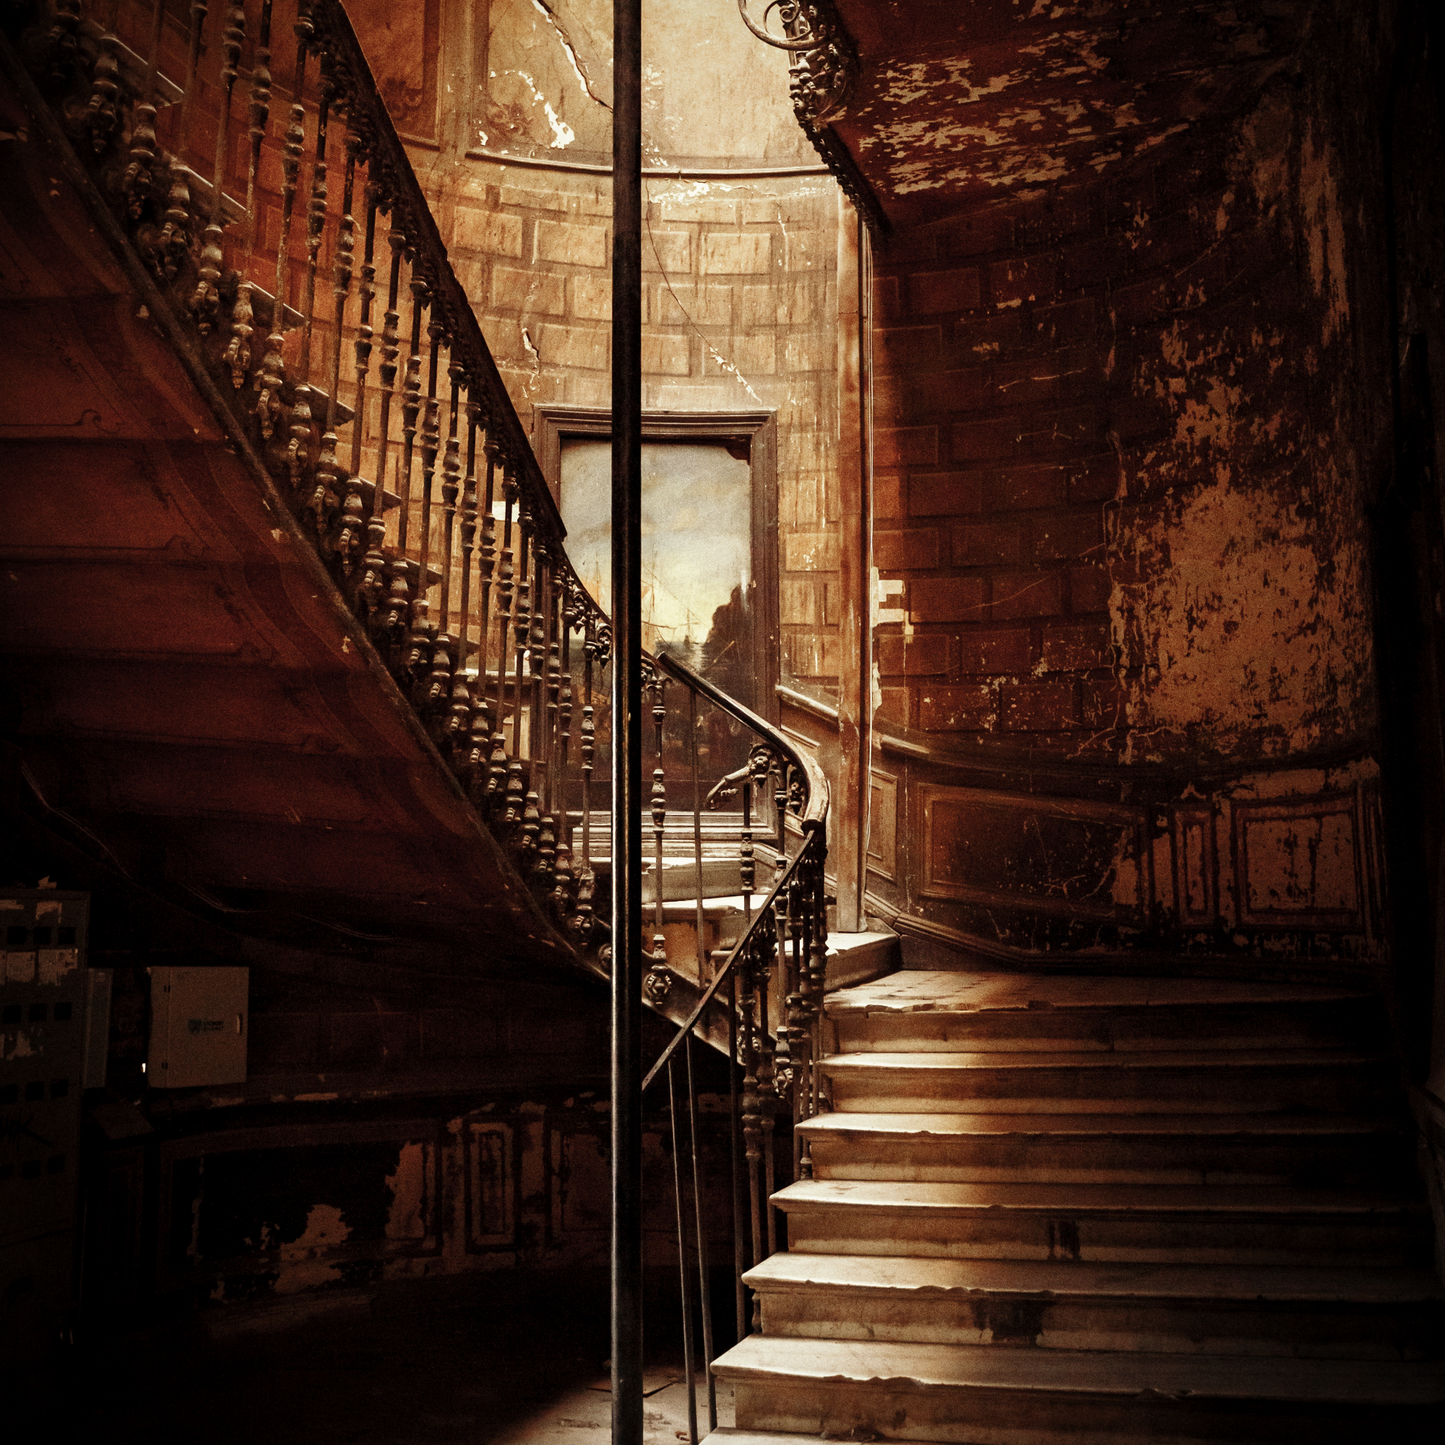 The staircase in an abandoned mansion, with peeling walls and ceiling.